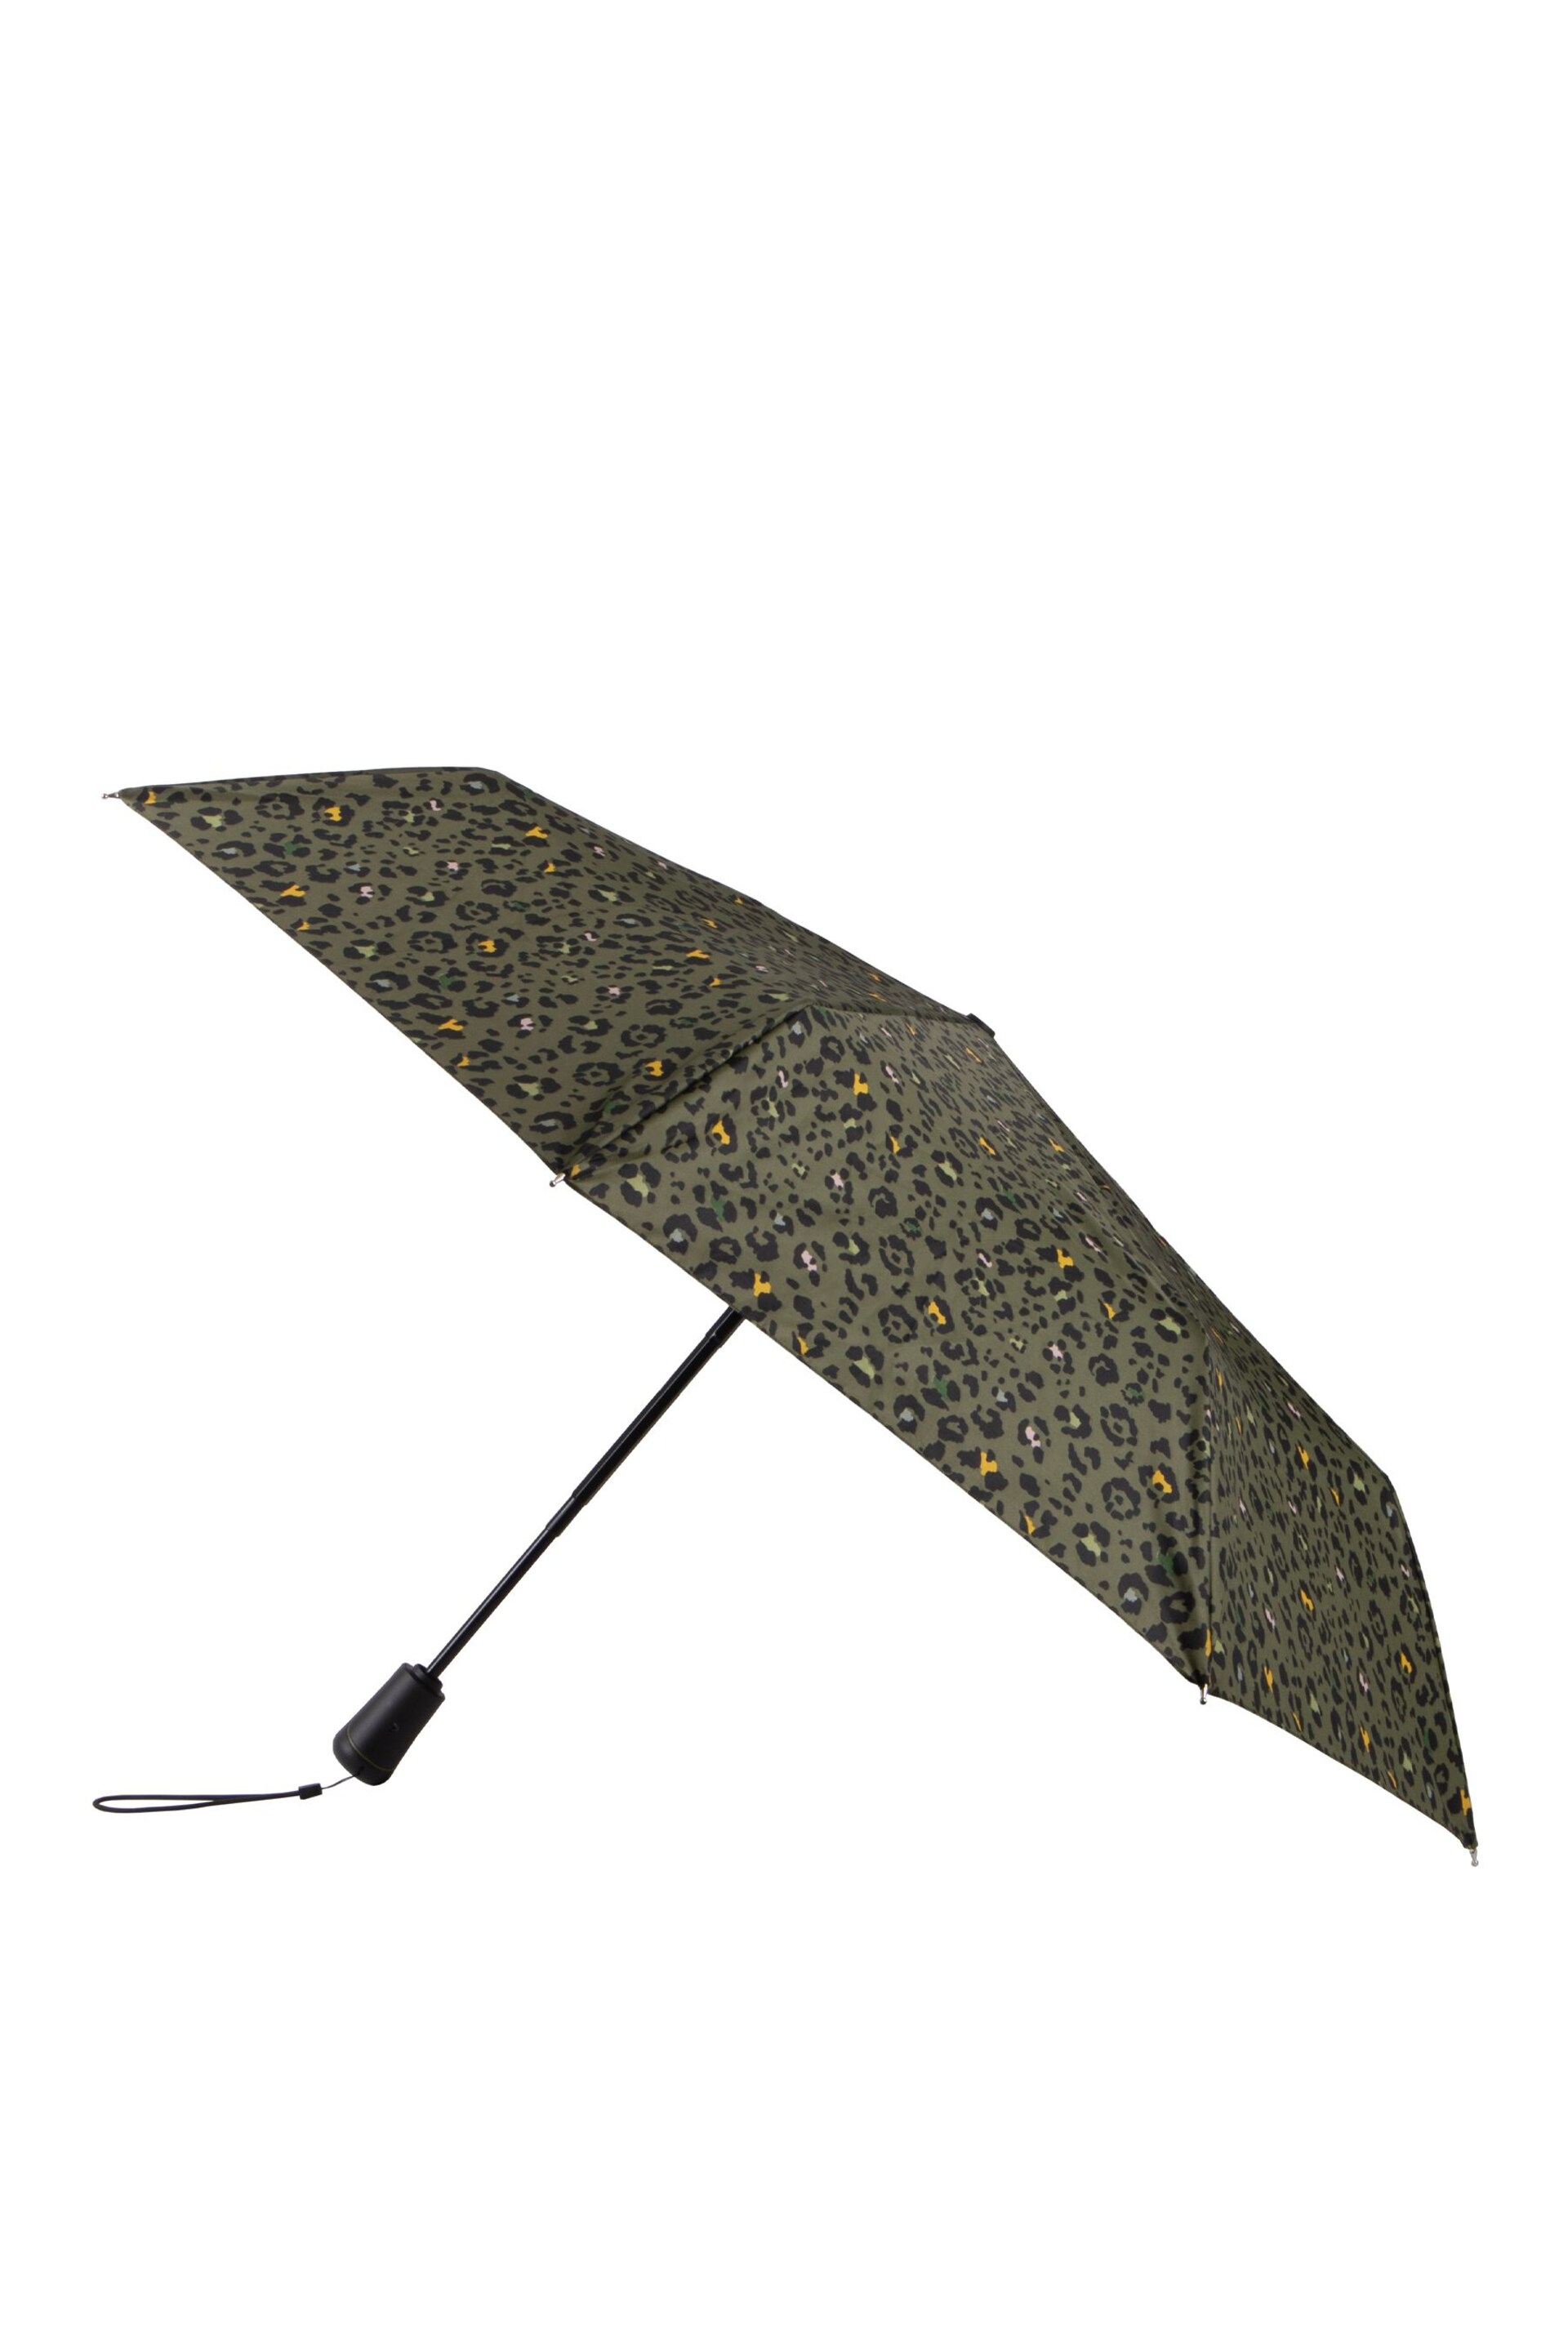 Totes Green Eco Xtra Strong Auto Open/Close Panther Print Umbrella - Image 3 of 4